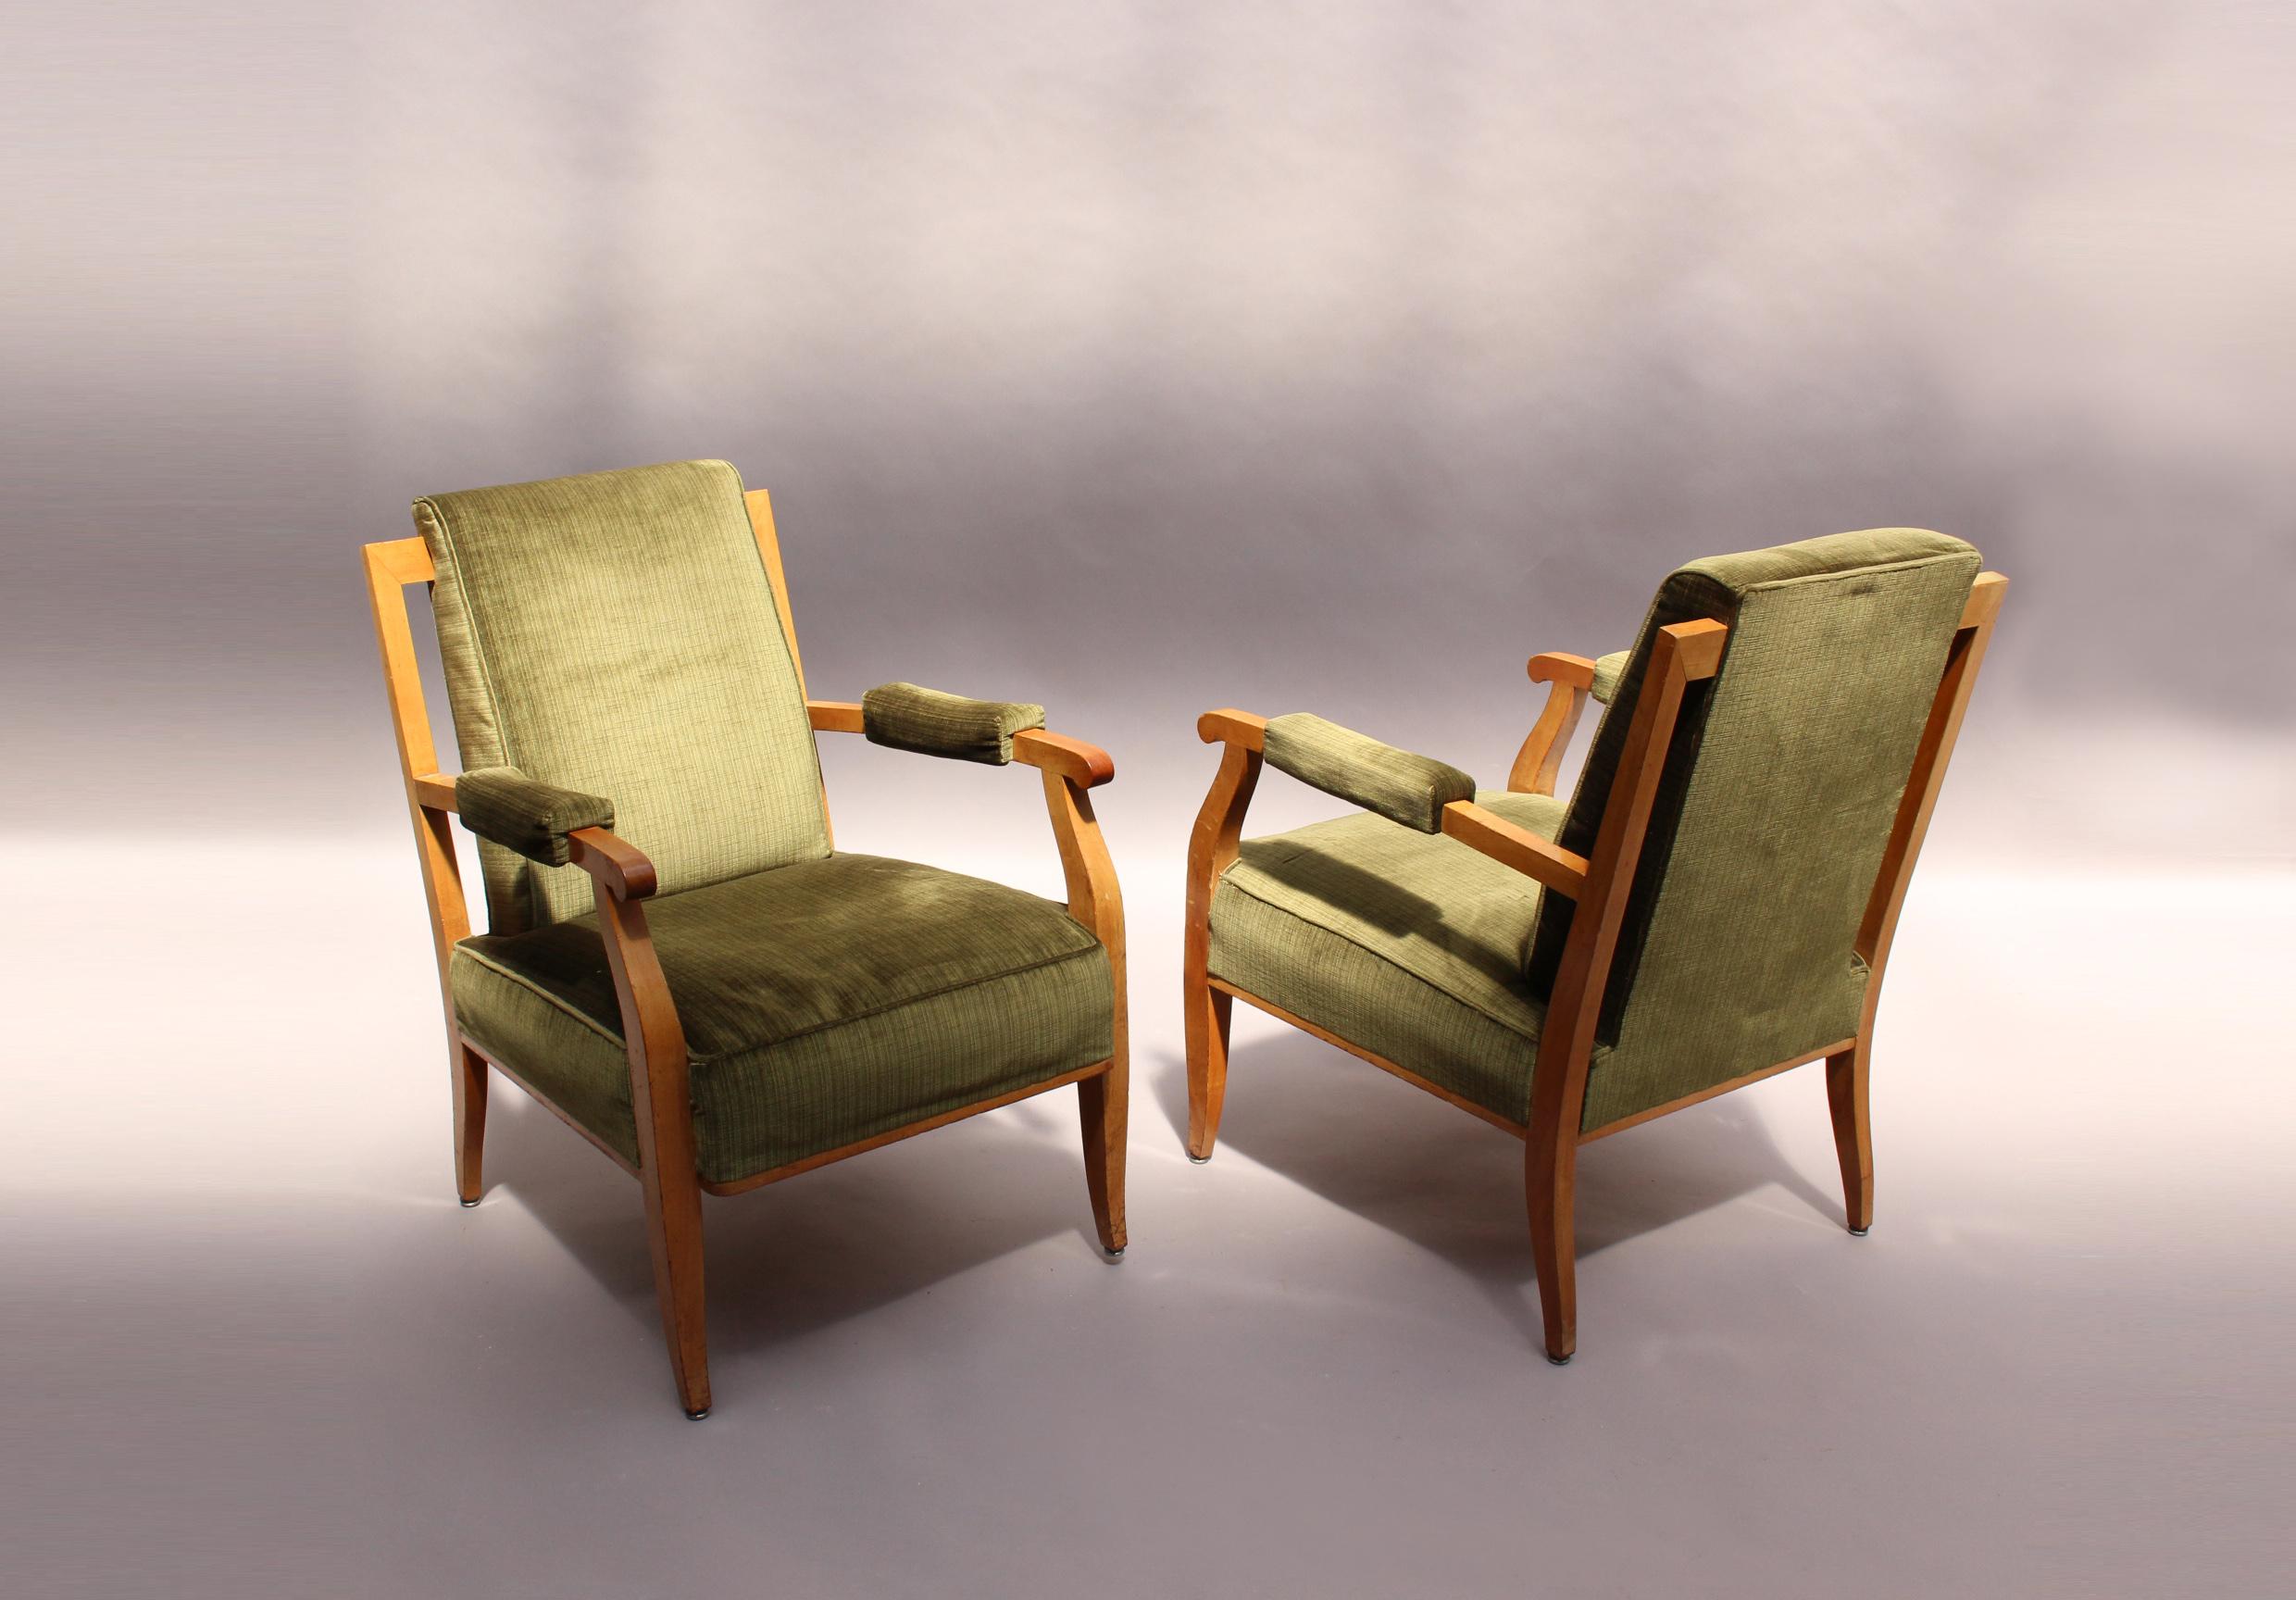 A pair of fine French Art Deco cherry wood armchairs by Jules Leleu.